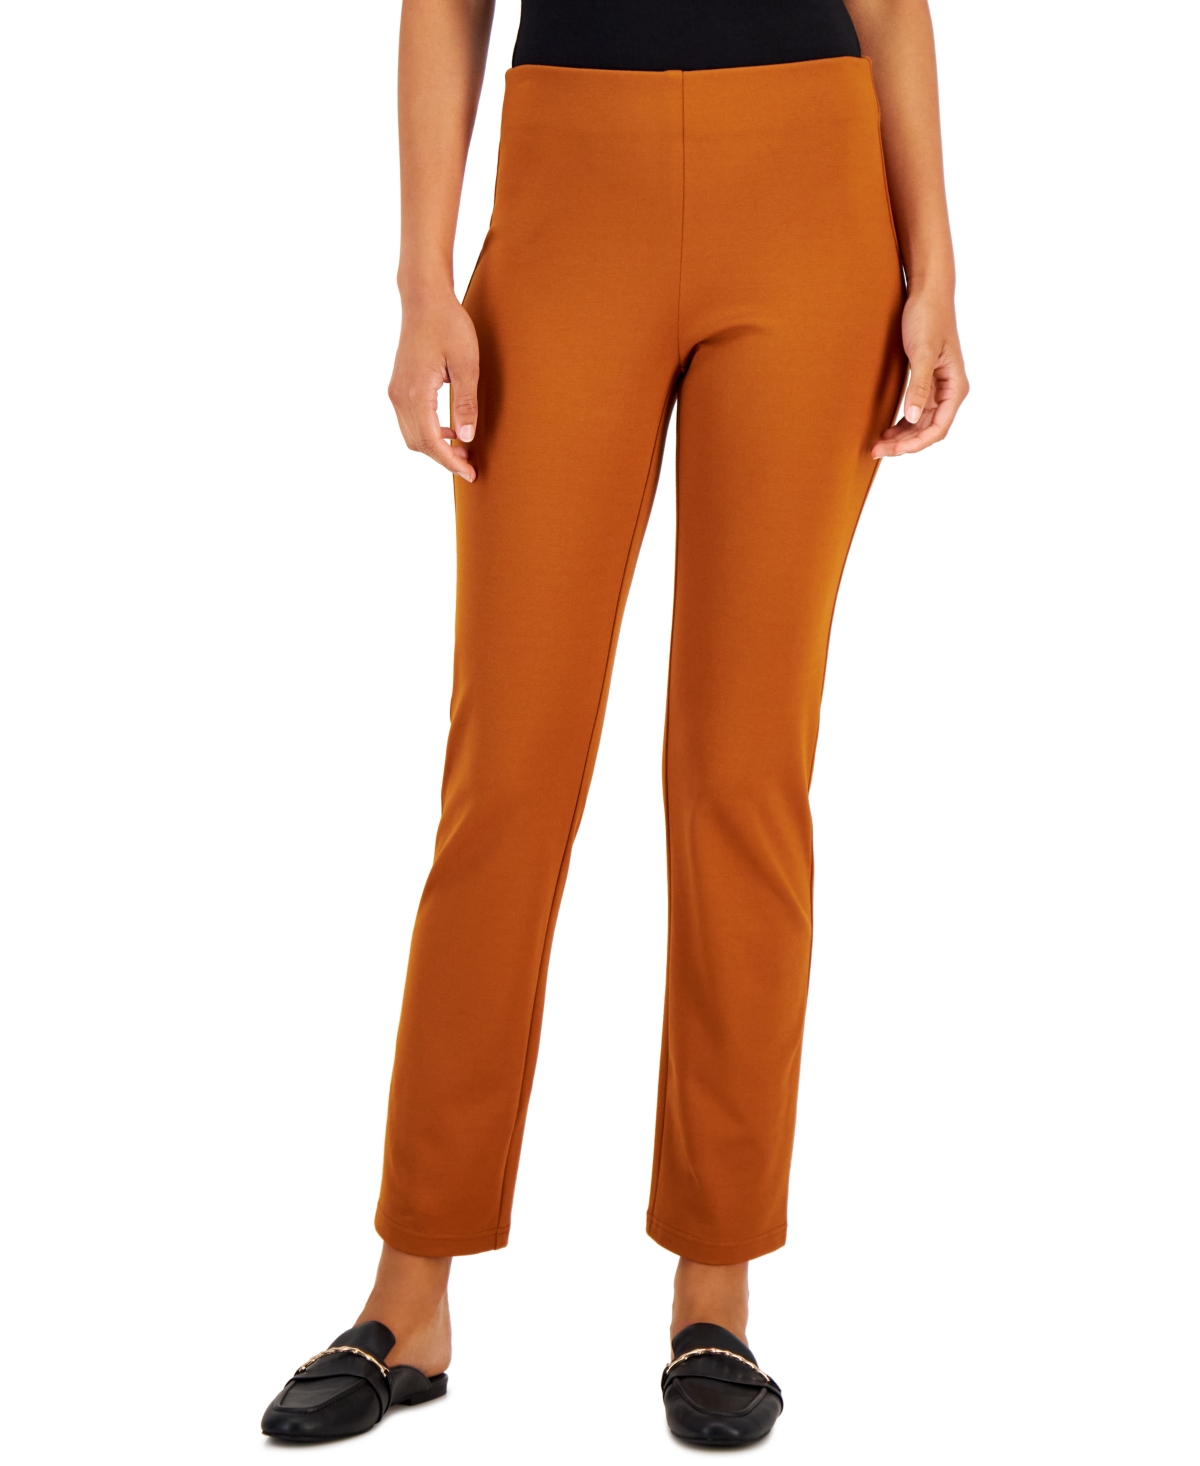 JM Collection Tummy-Control Pull-on Studded Capri Pants, Created for Macy's  - Macy's